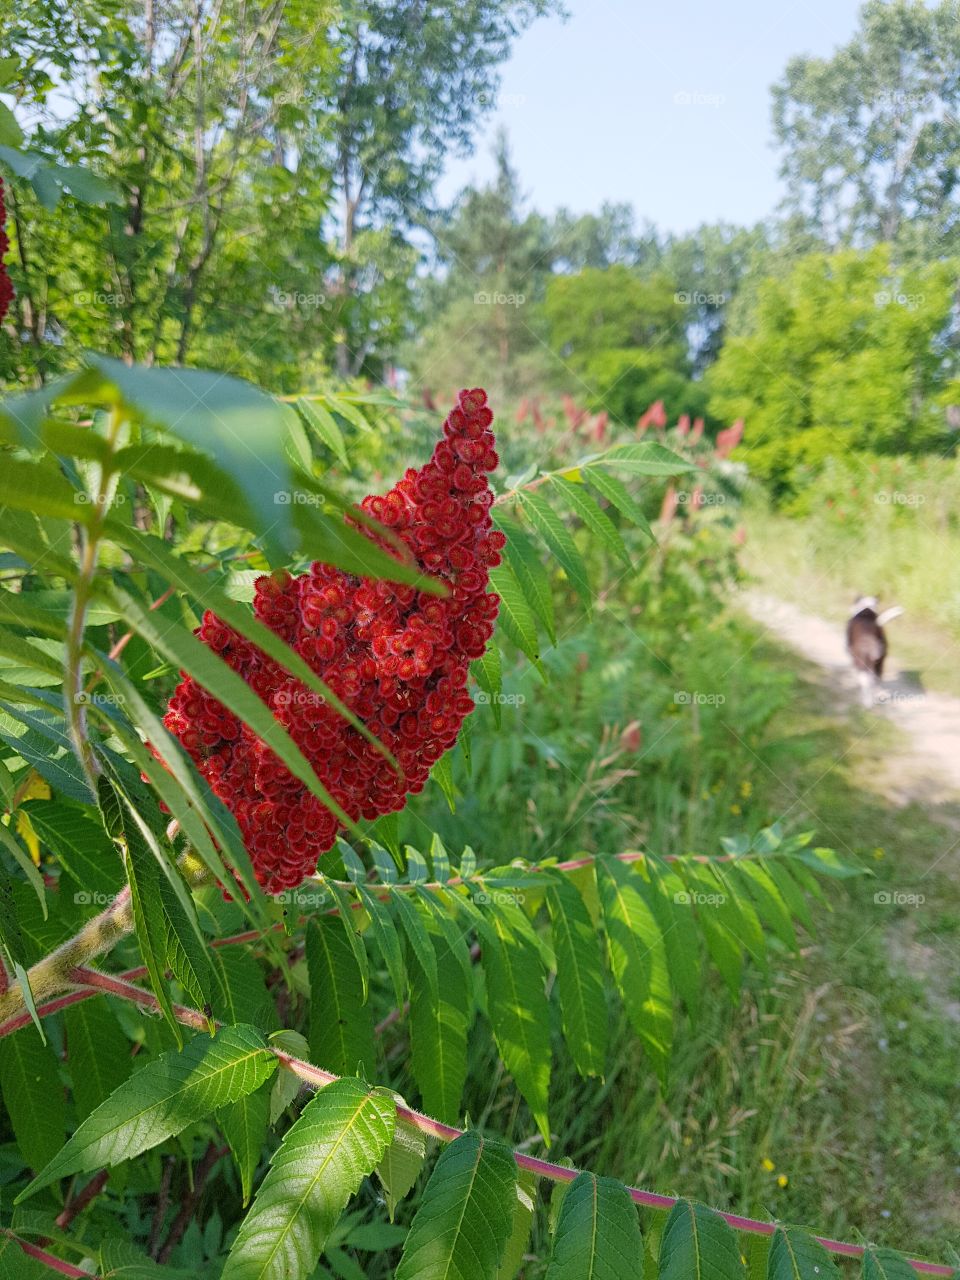 Bright red bulbs grow in a conservation area. A dog walks in the background.